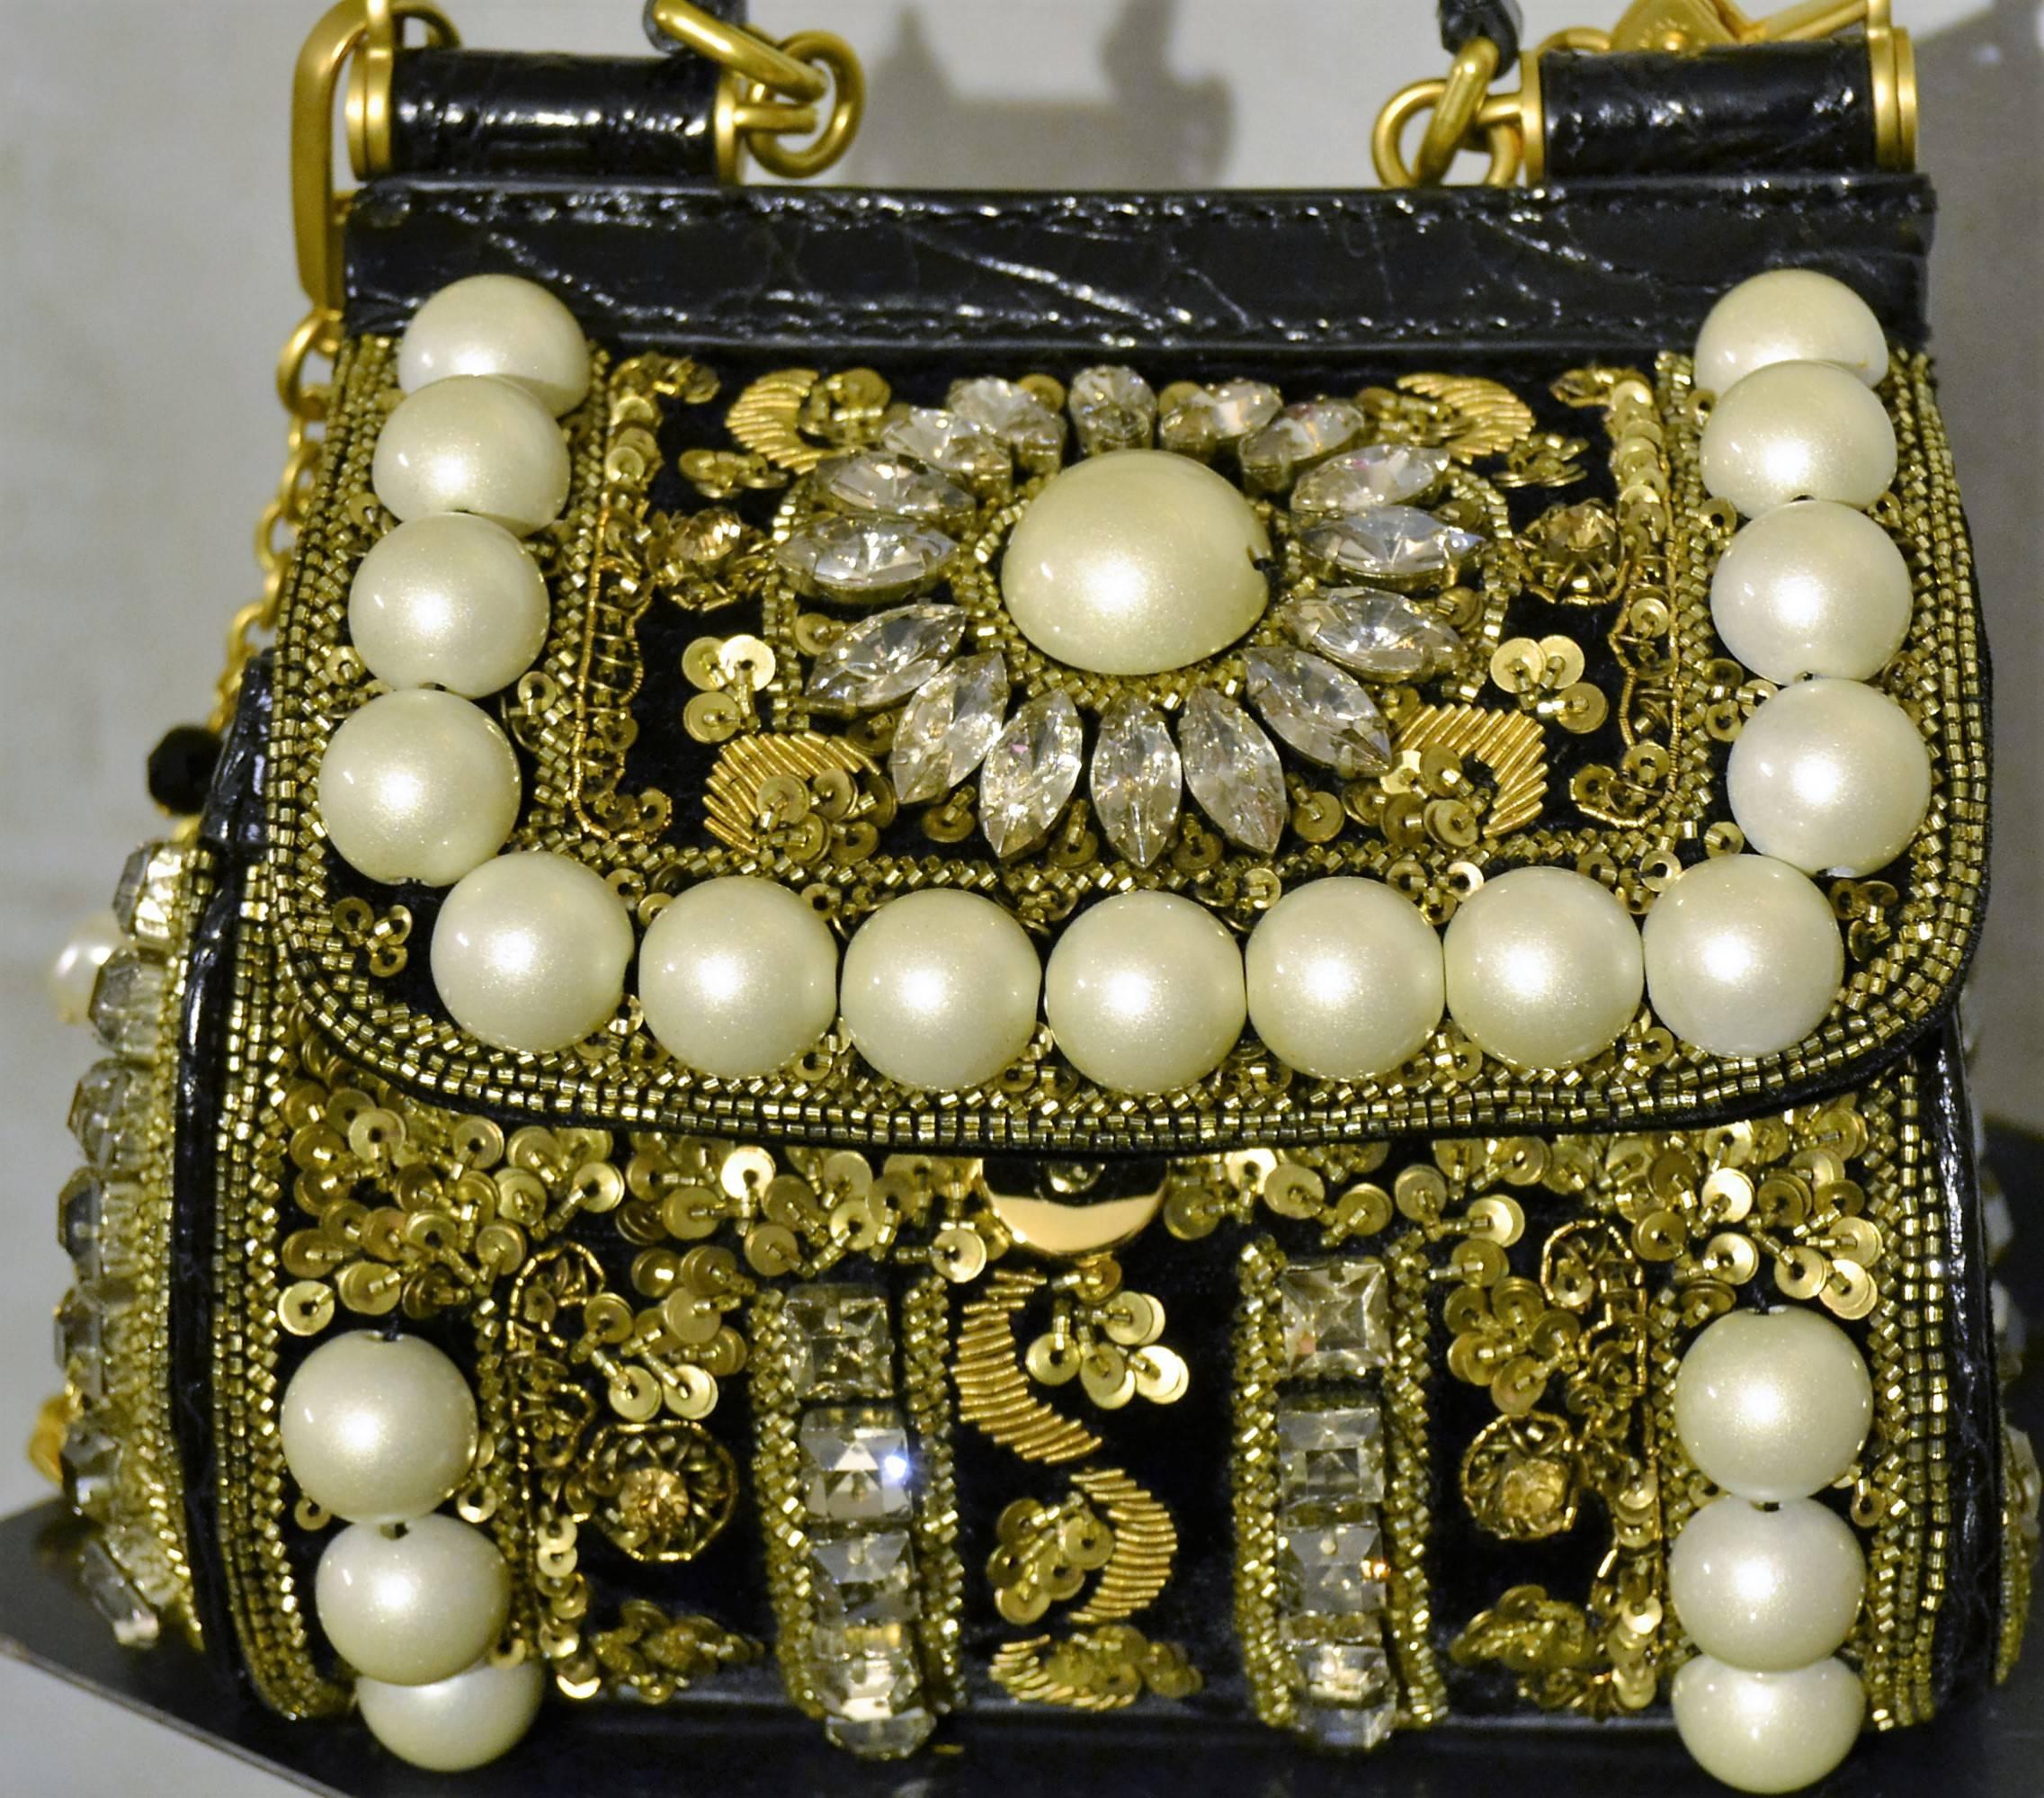 2014 Dolce & Gabbana Small Sicily bag with pearls 2